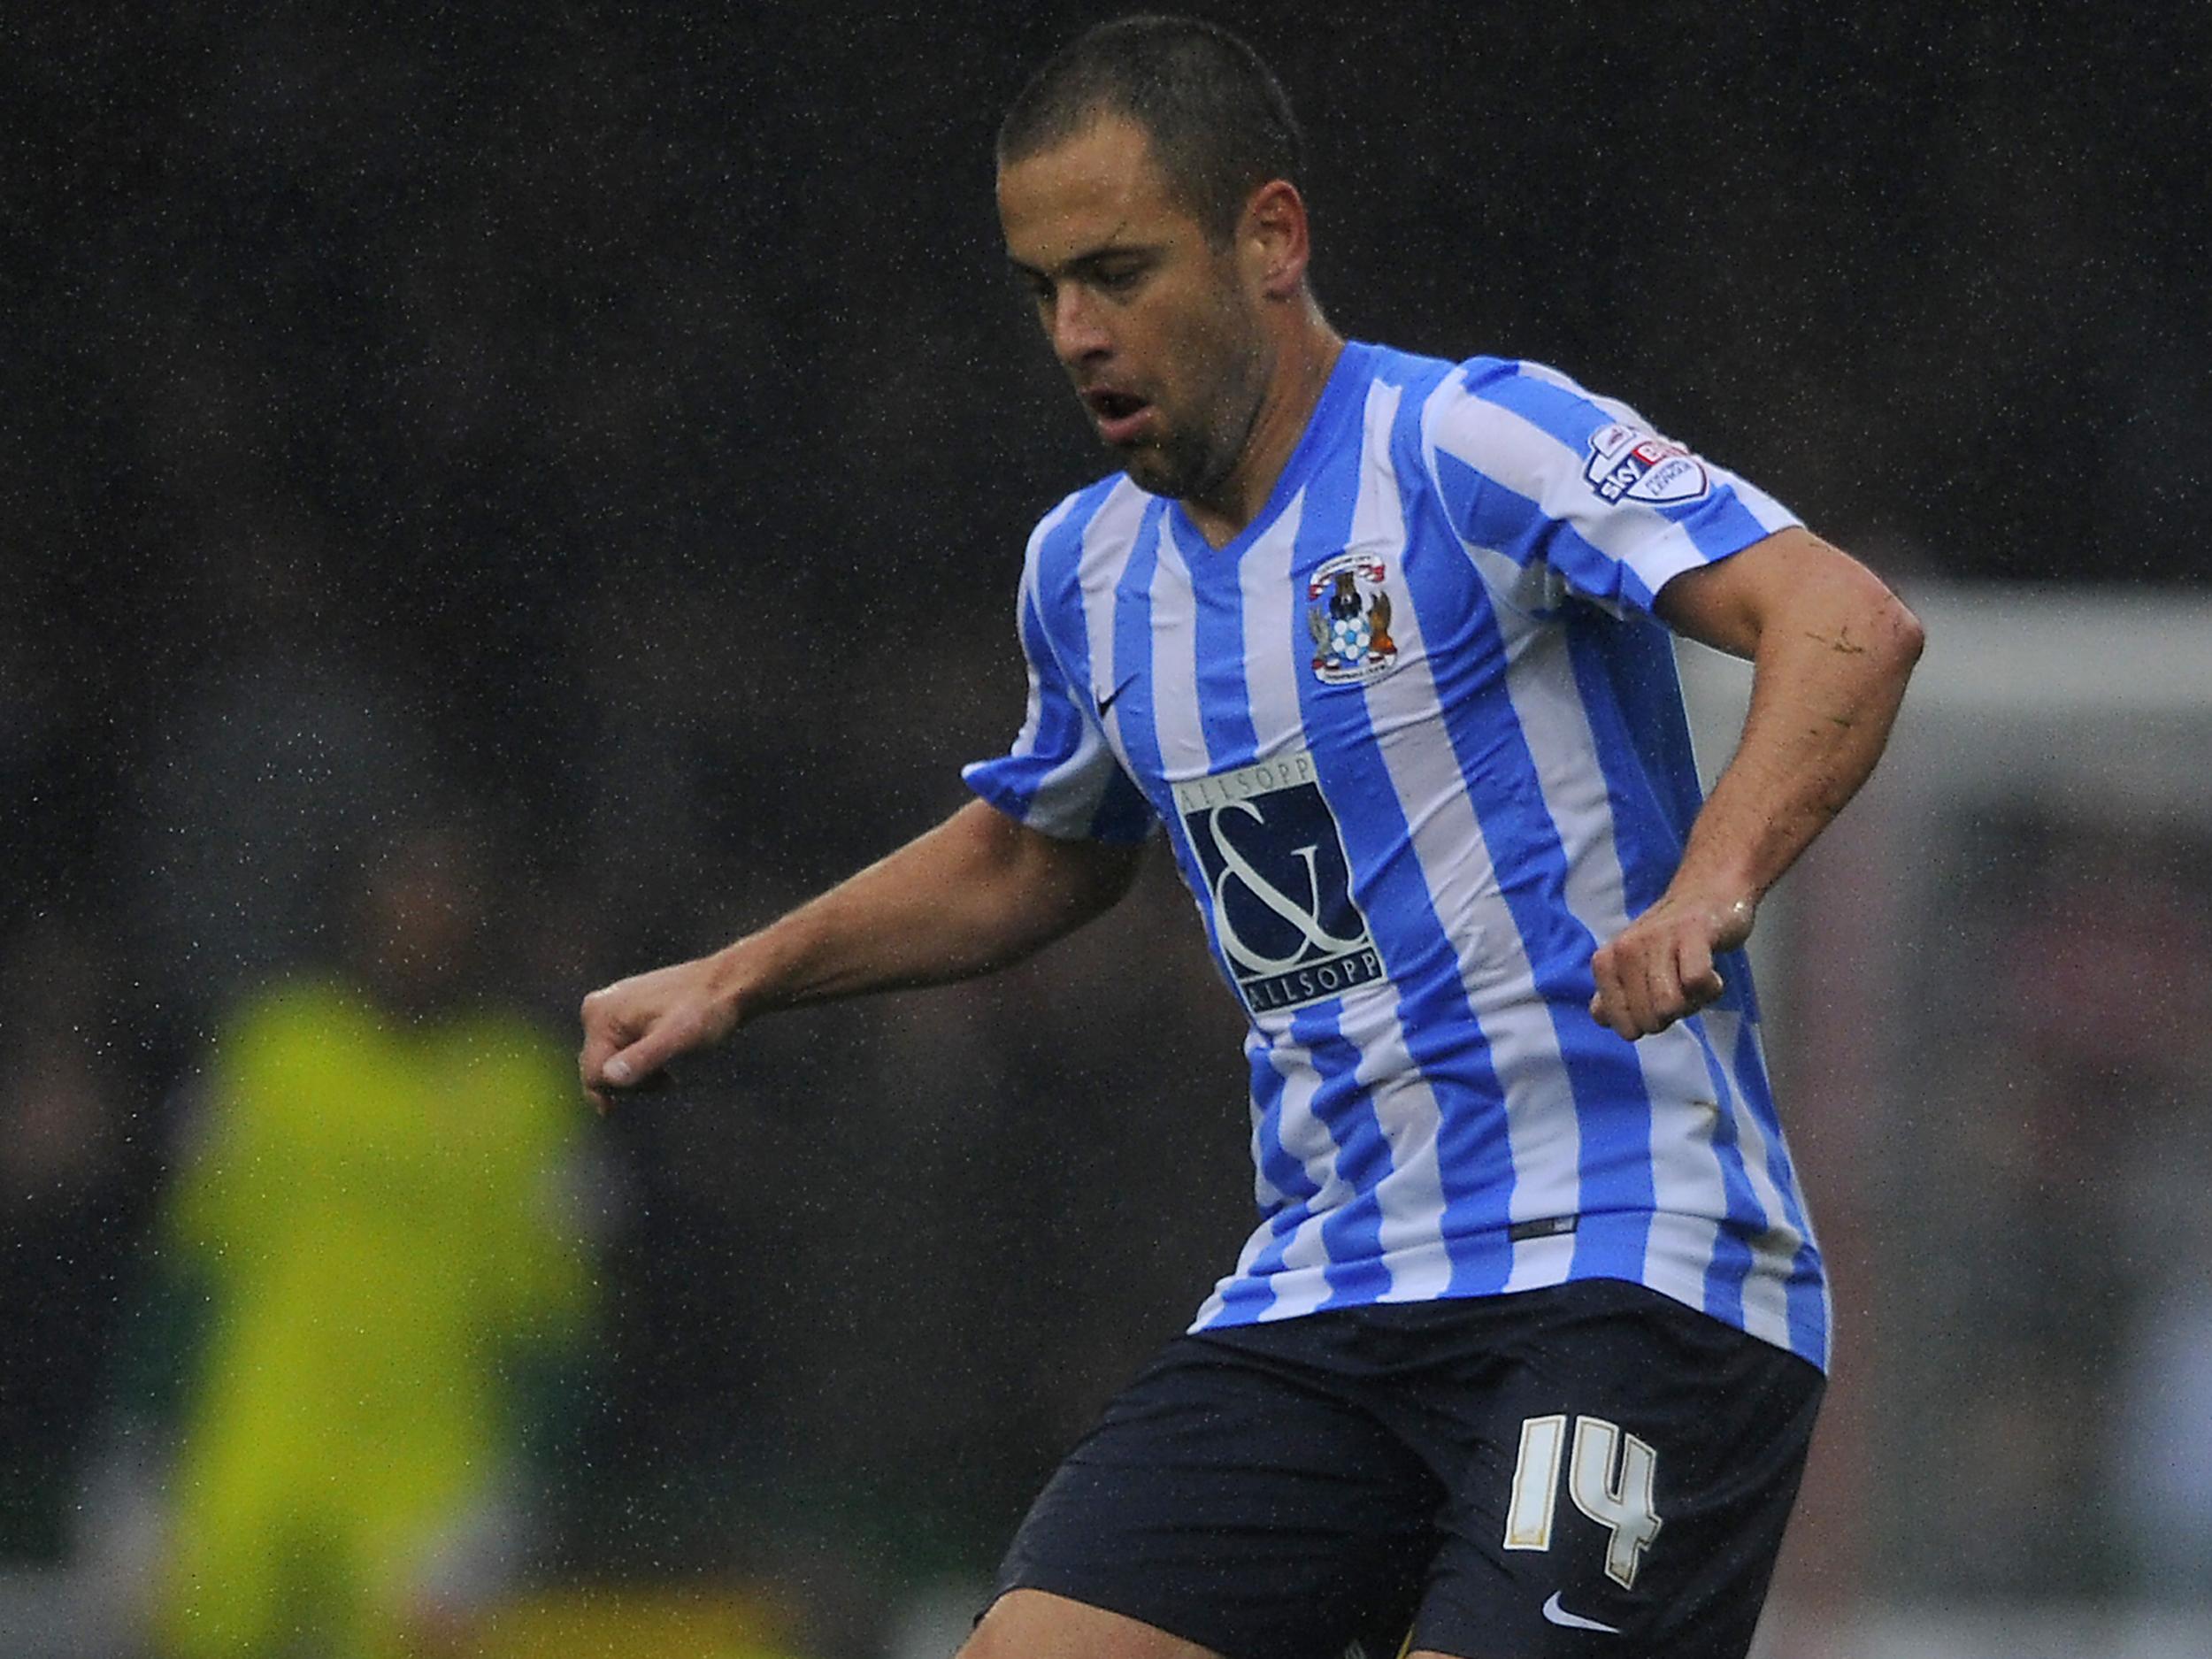 Joe Cole has made an impression at Coventry City